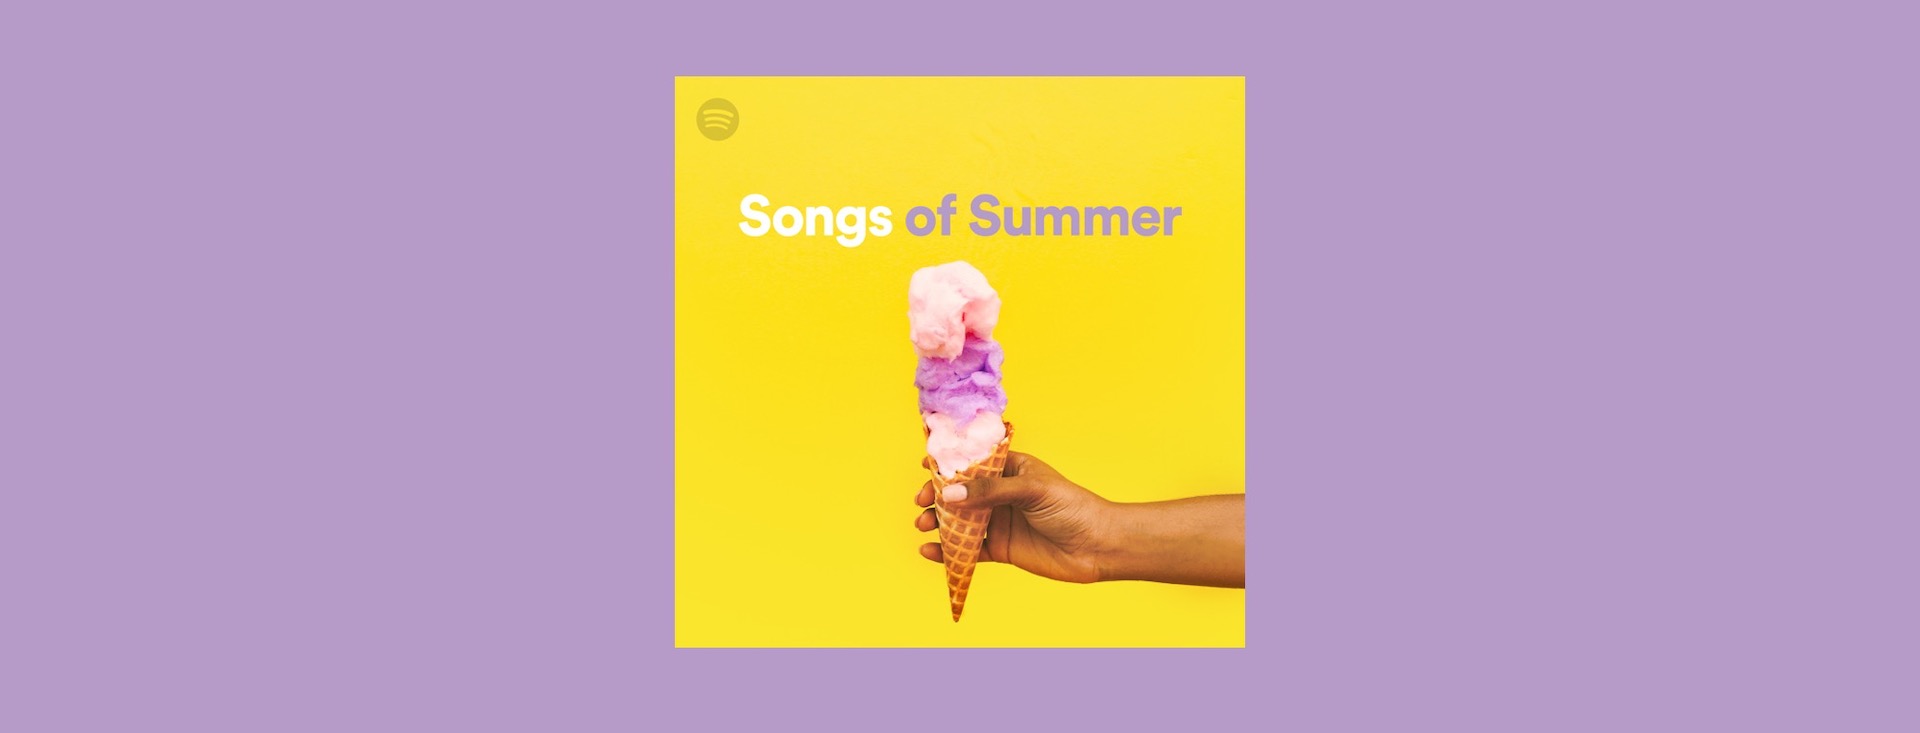 Spotify reveal their Songs of Summer 2021 predictions